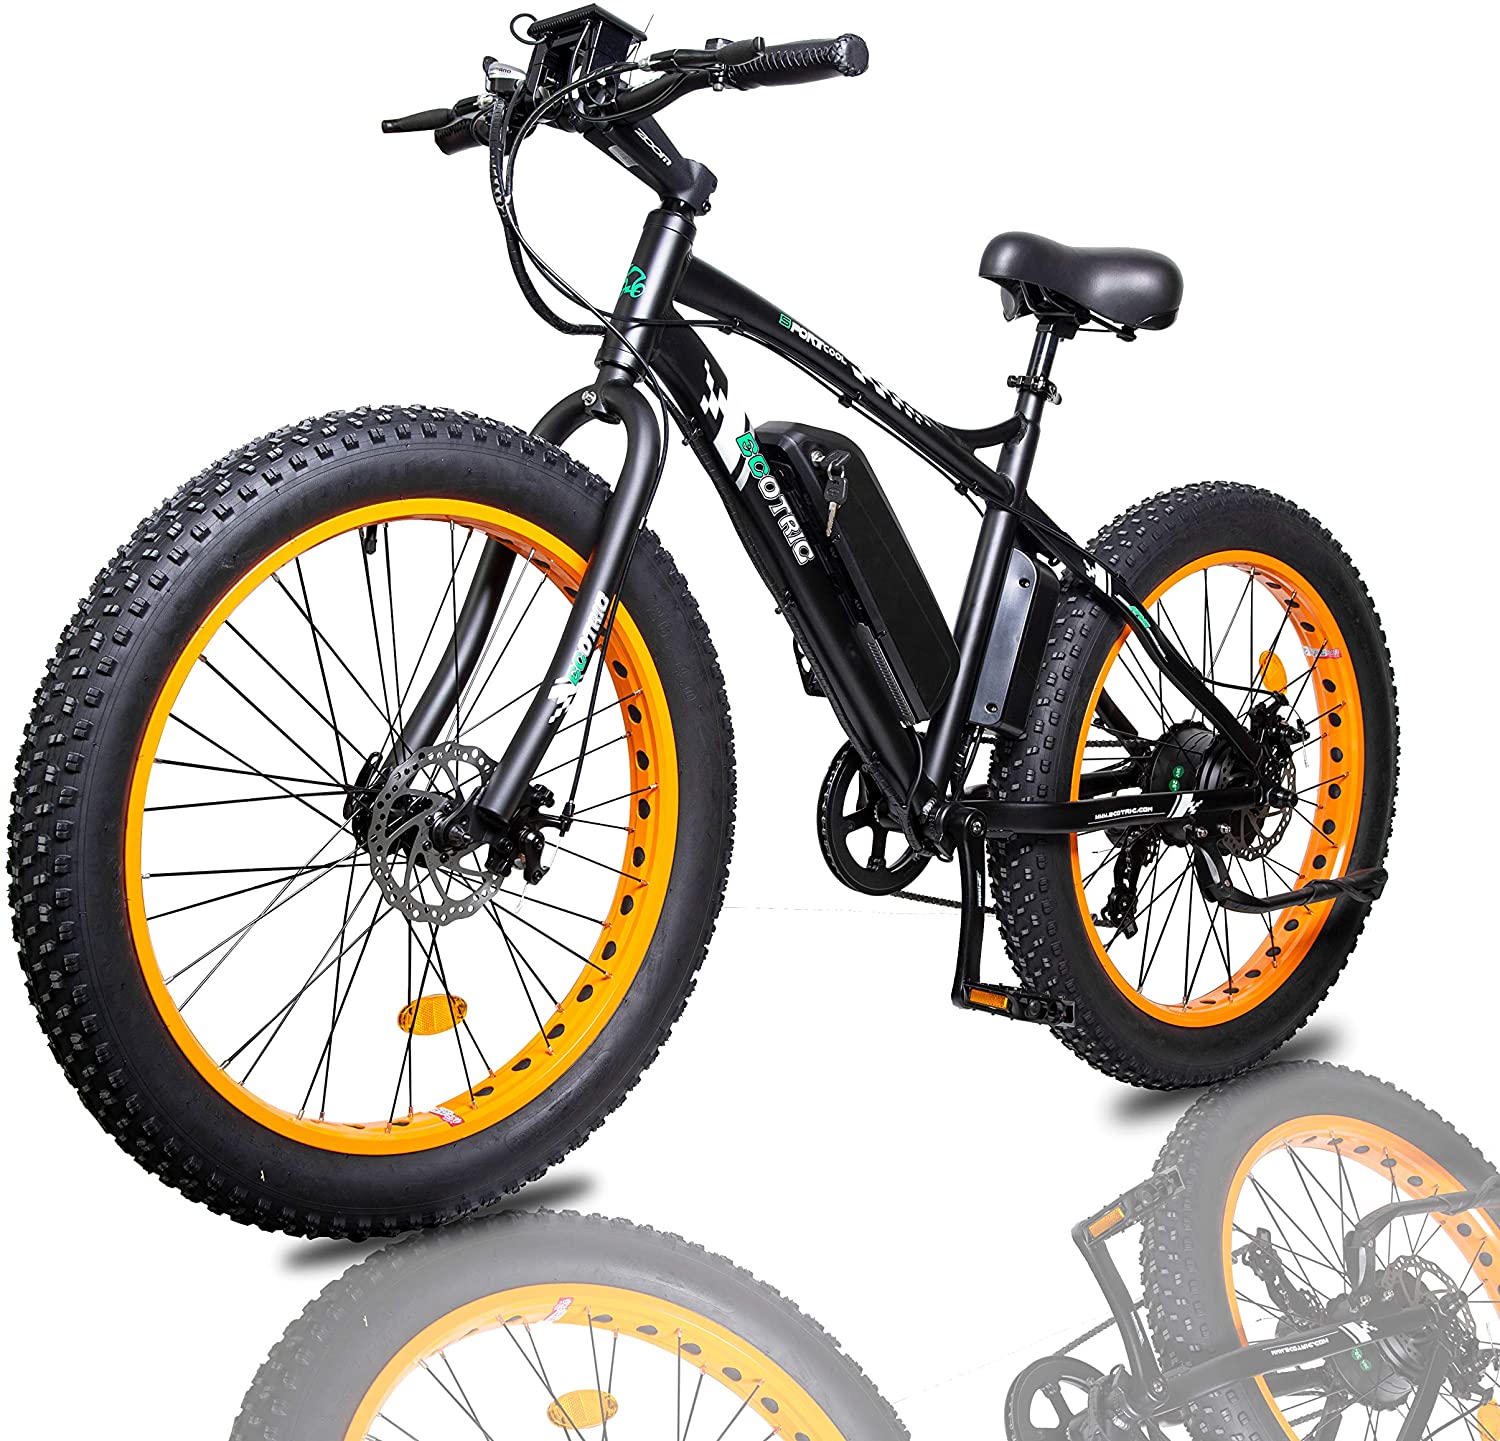 Top Rated Electric Bikes